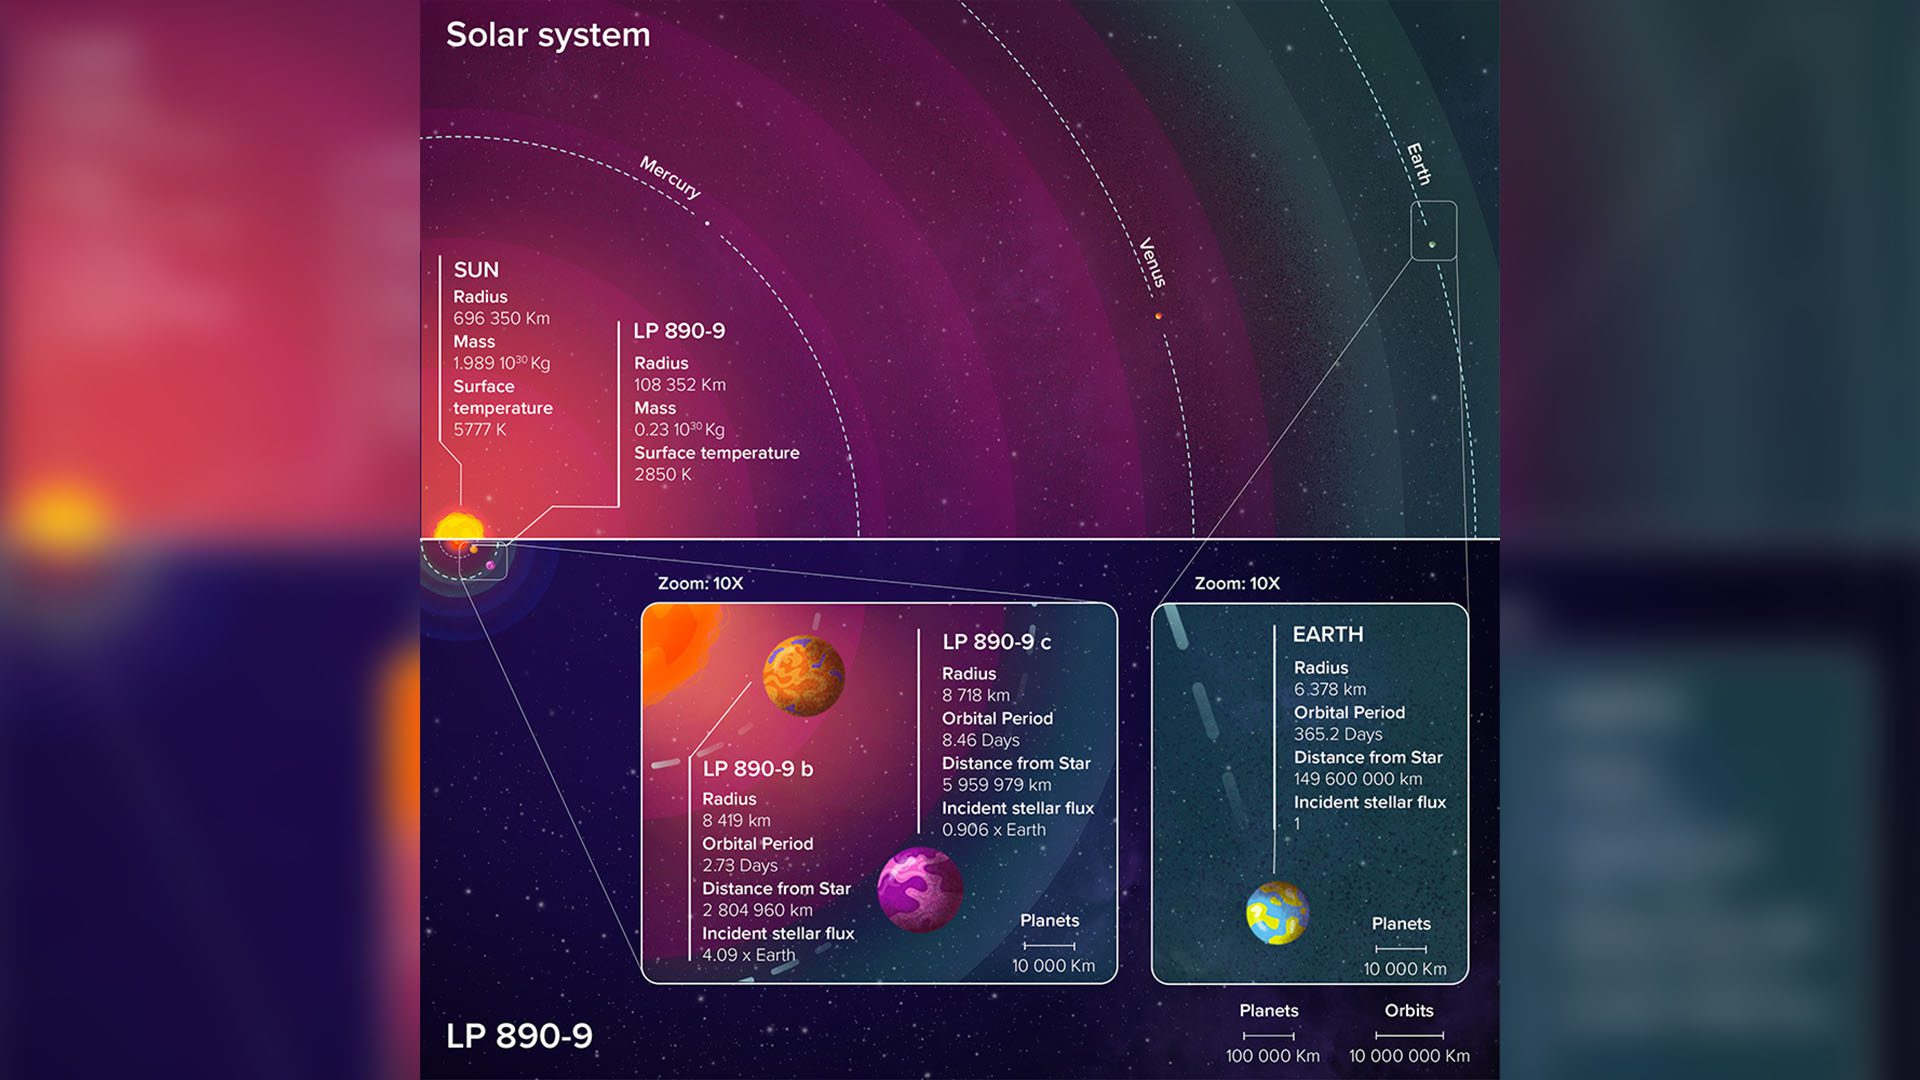 Comparison between the LP 890-9 system with a planet that can sustain life and the inner Solar System; Photo Credit: University of Liège via Twitter